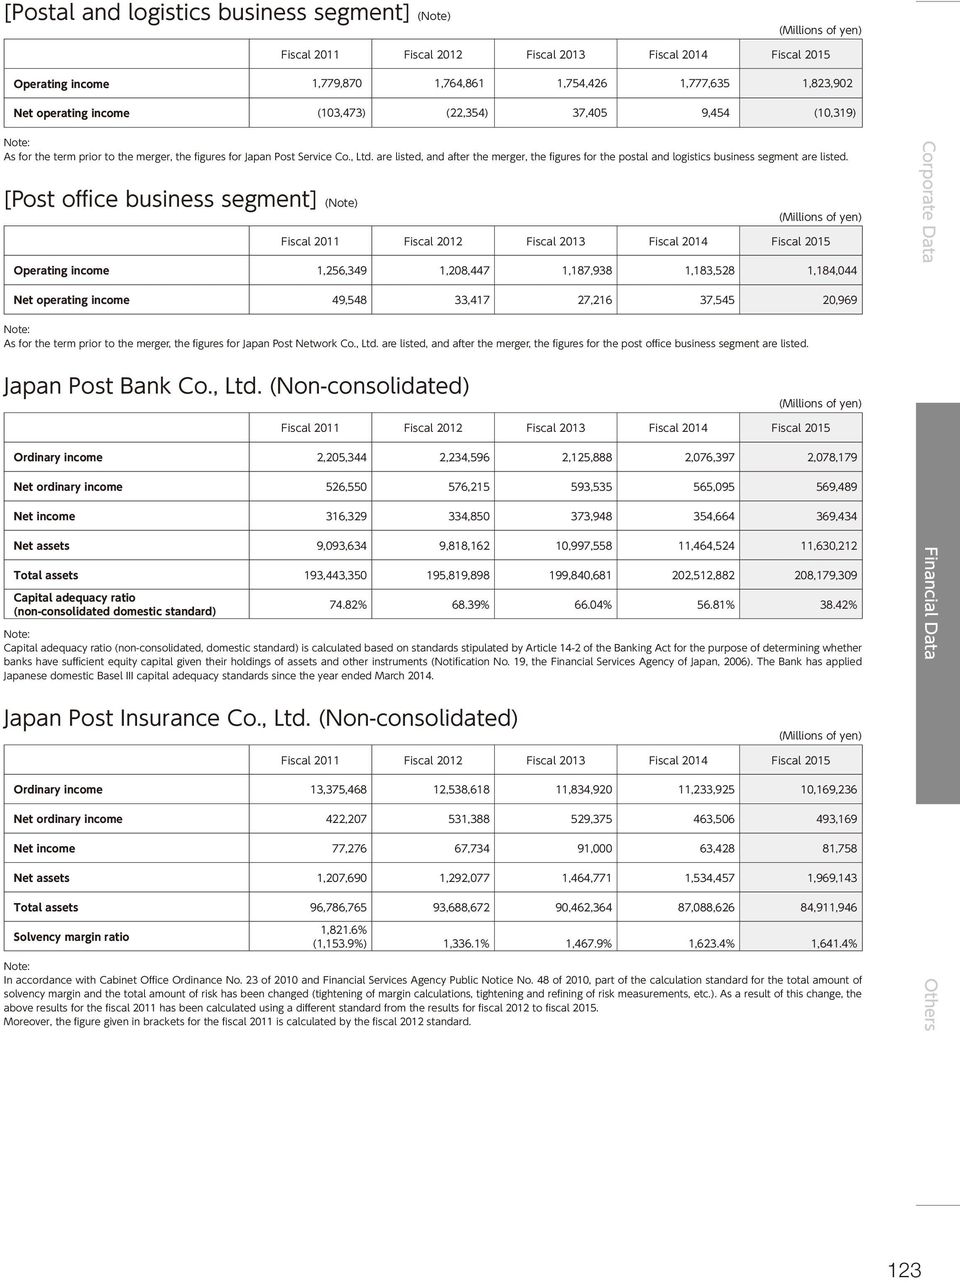 are listed, and after the merger, the figures for the postal and logistics business segment are listed.